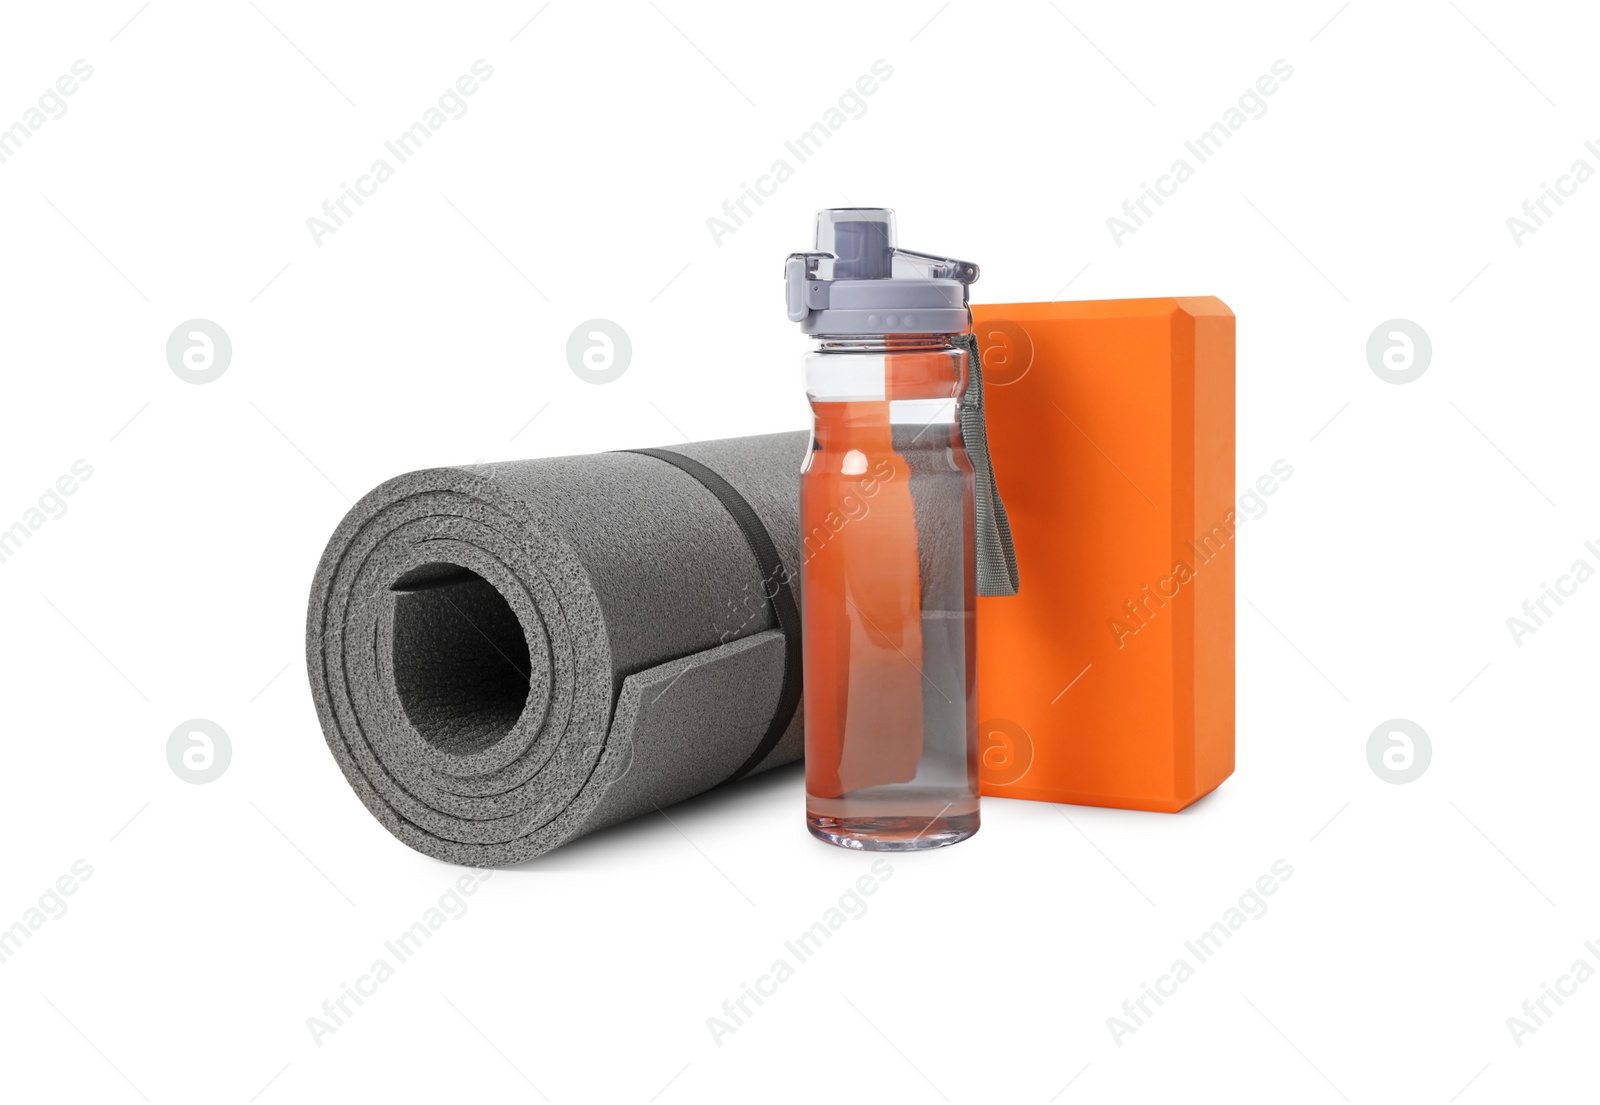 Photo of Grey exercise mat, yoga block and bottle of water isolated on white